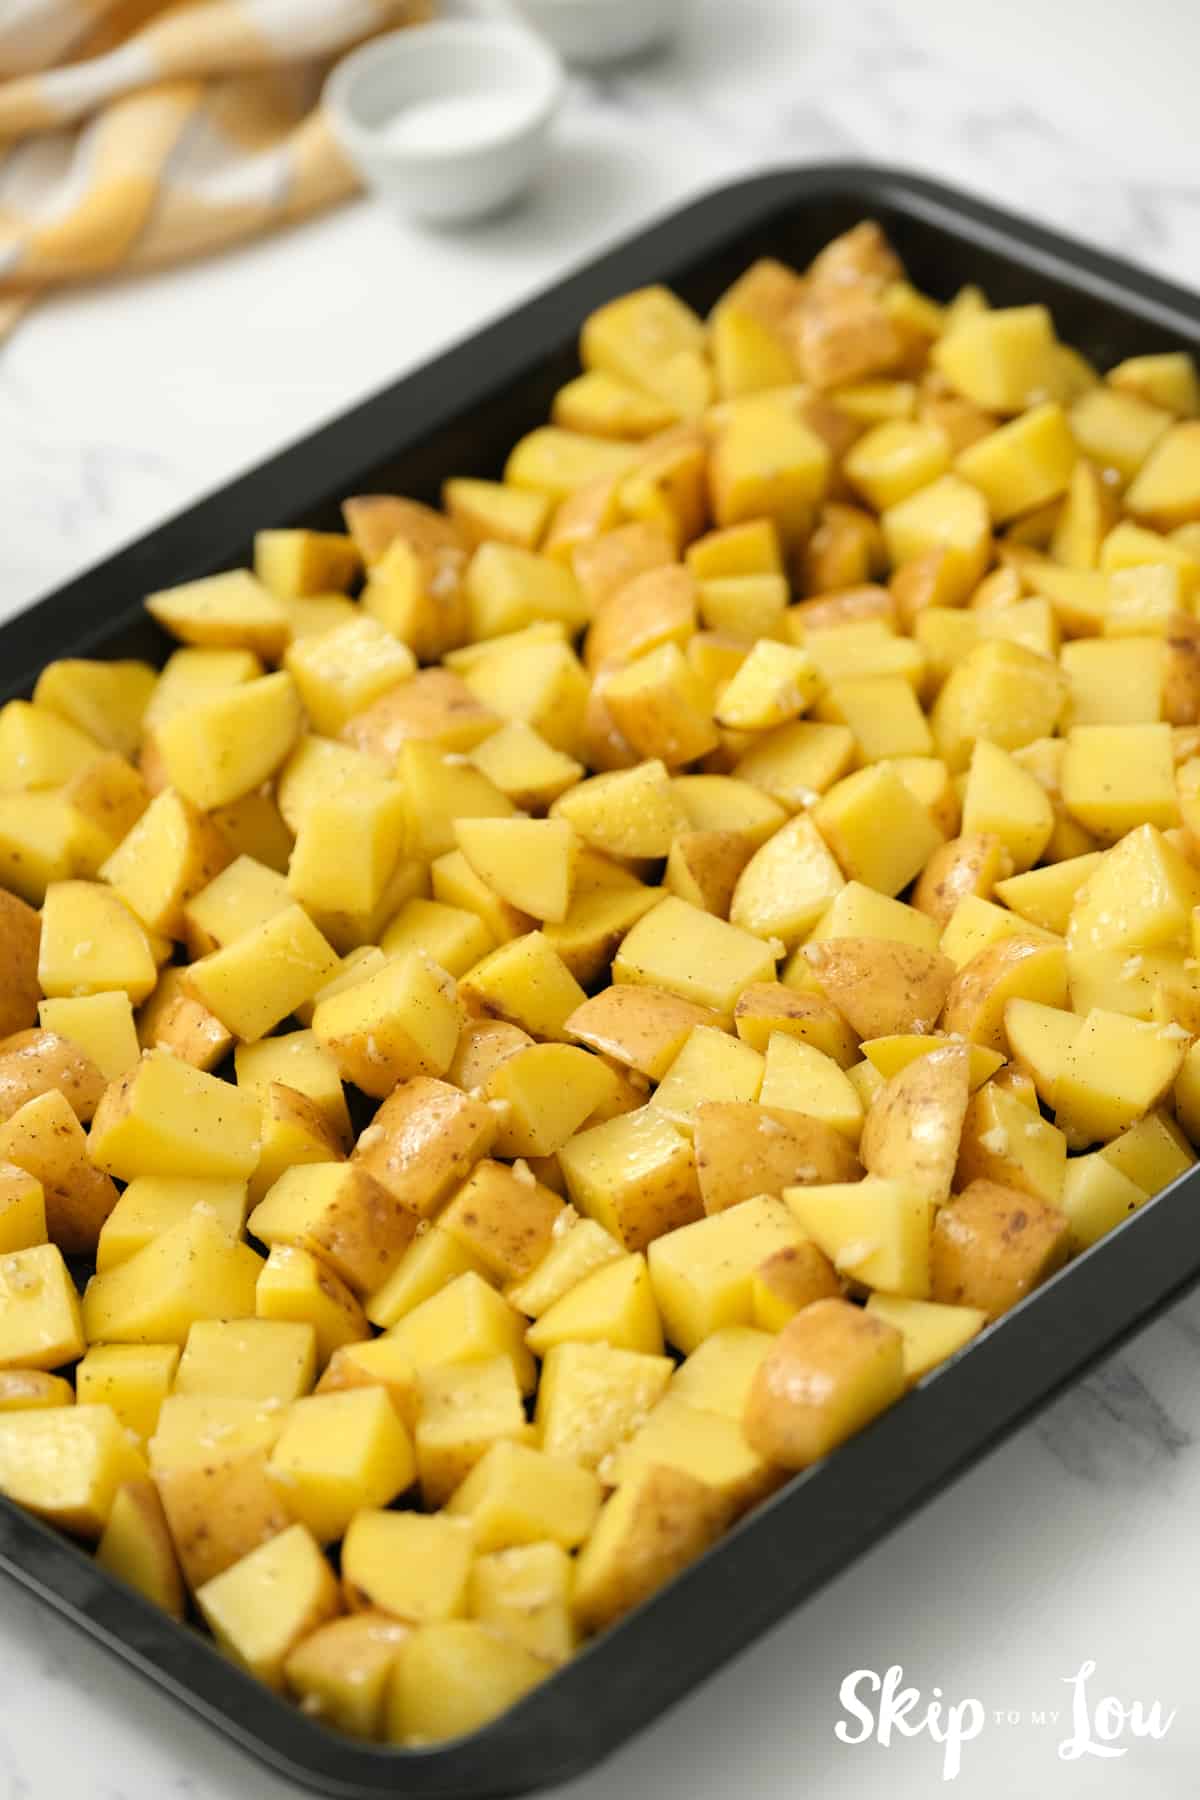 spread potatoes evenly in pan